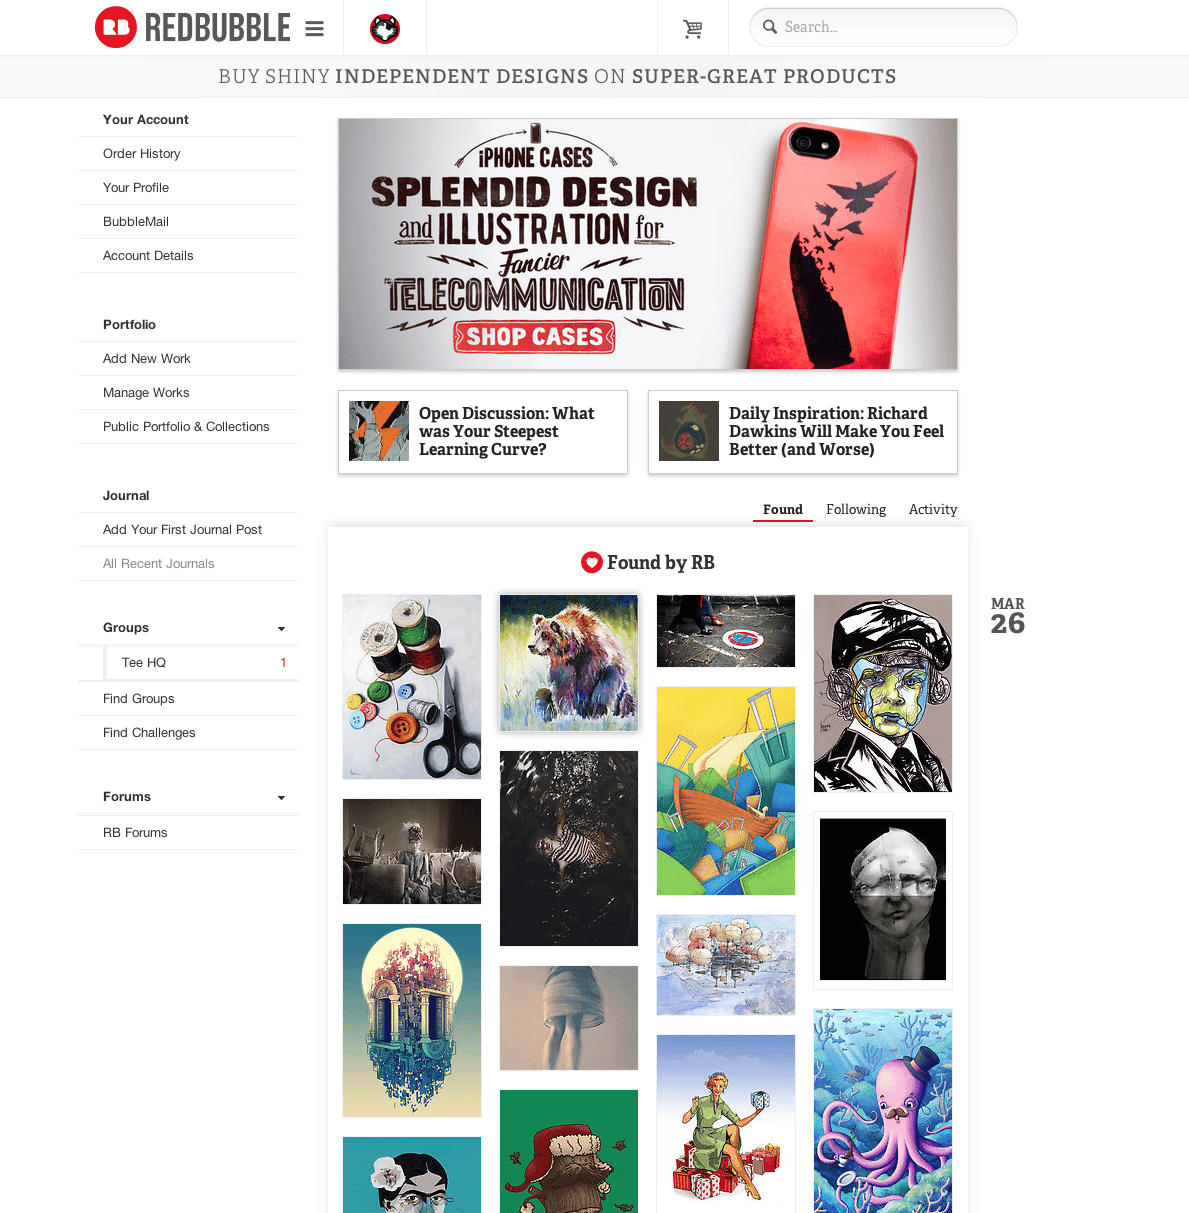 My Logstache illustration featured on redbubble.com